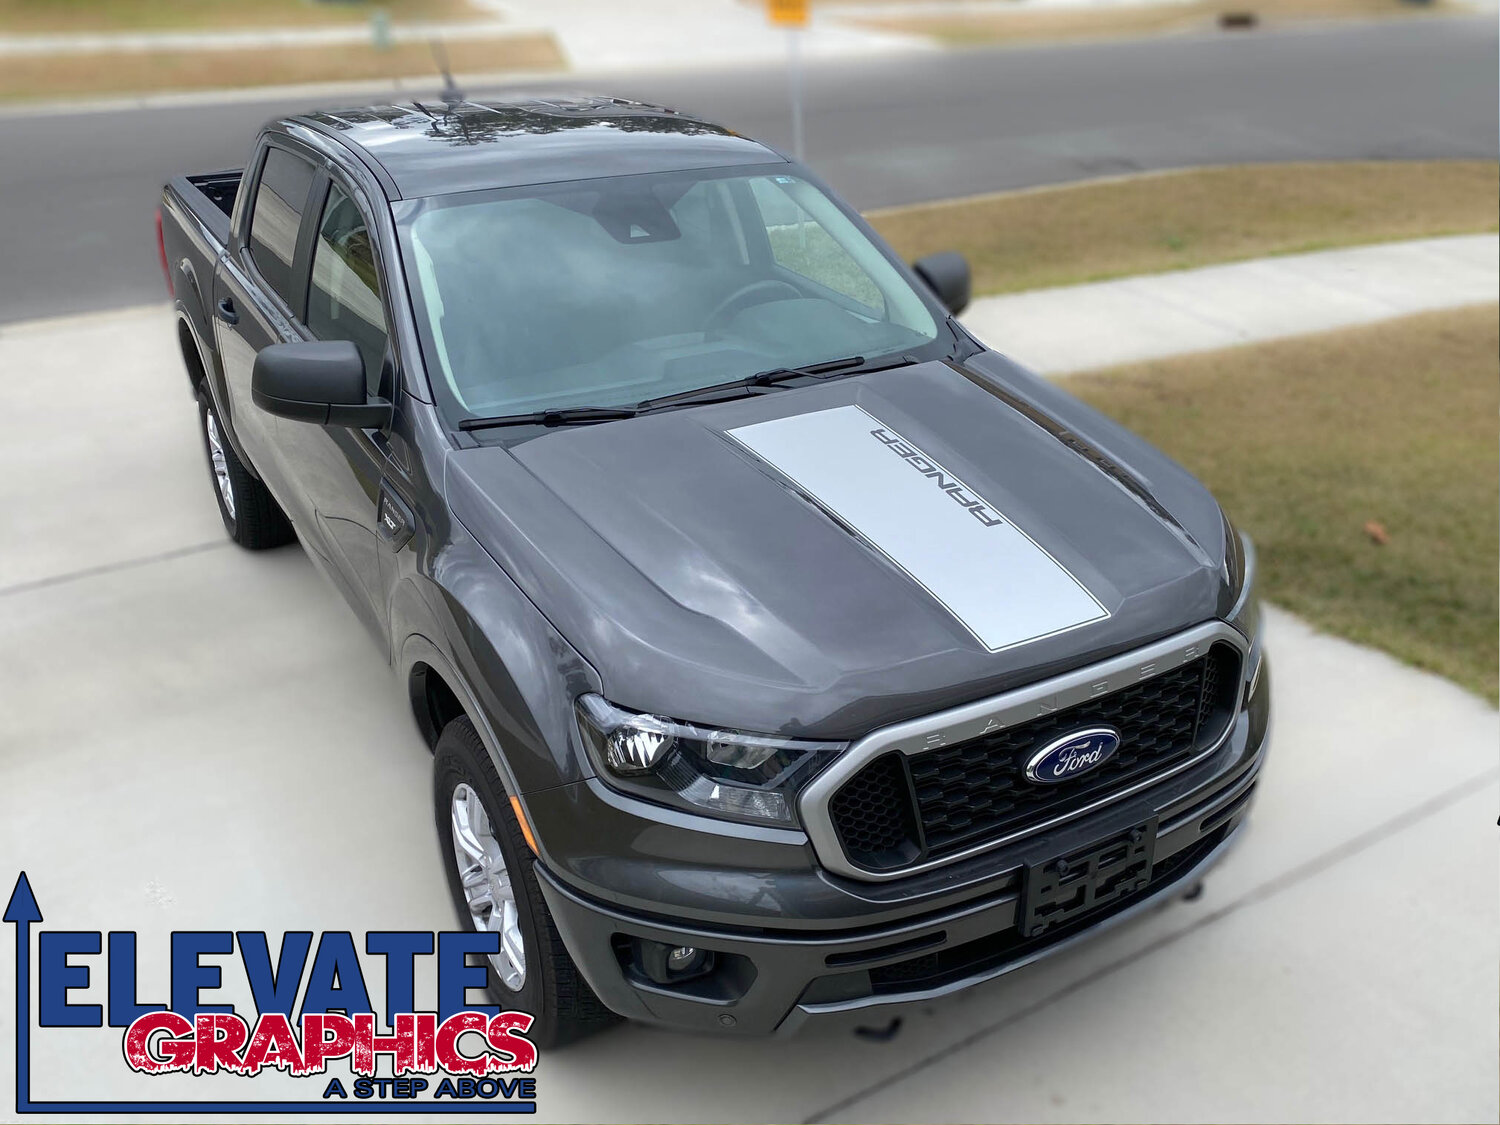  Elevate Graphics - Compatible with Ford Ranger Side Split  Graphics Vinyl Auto Stripes Decals and Stickers Years 2019-2023